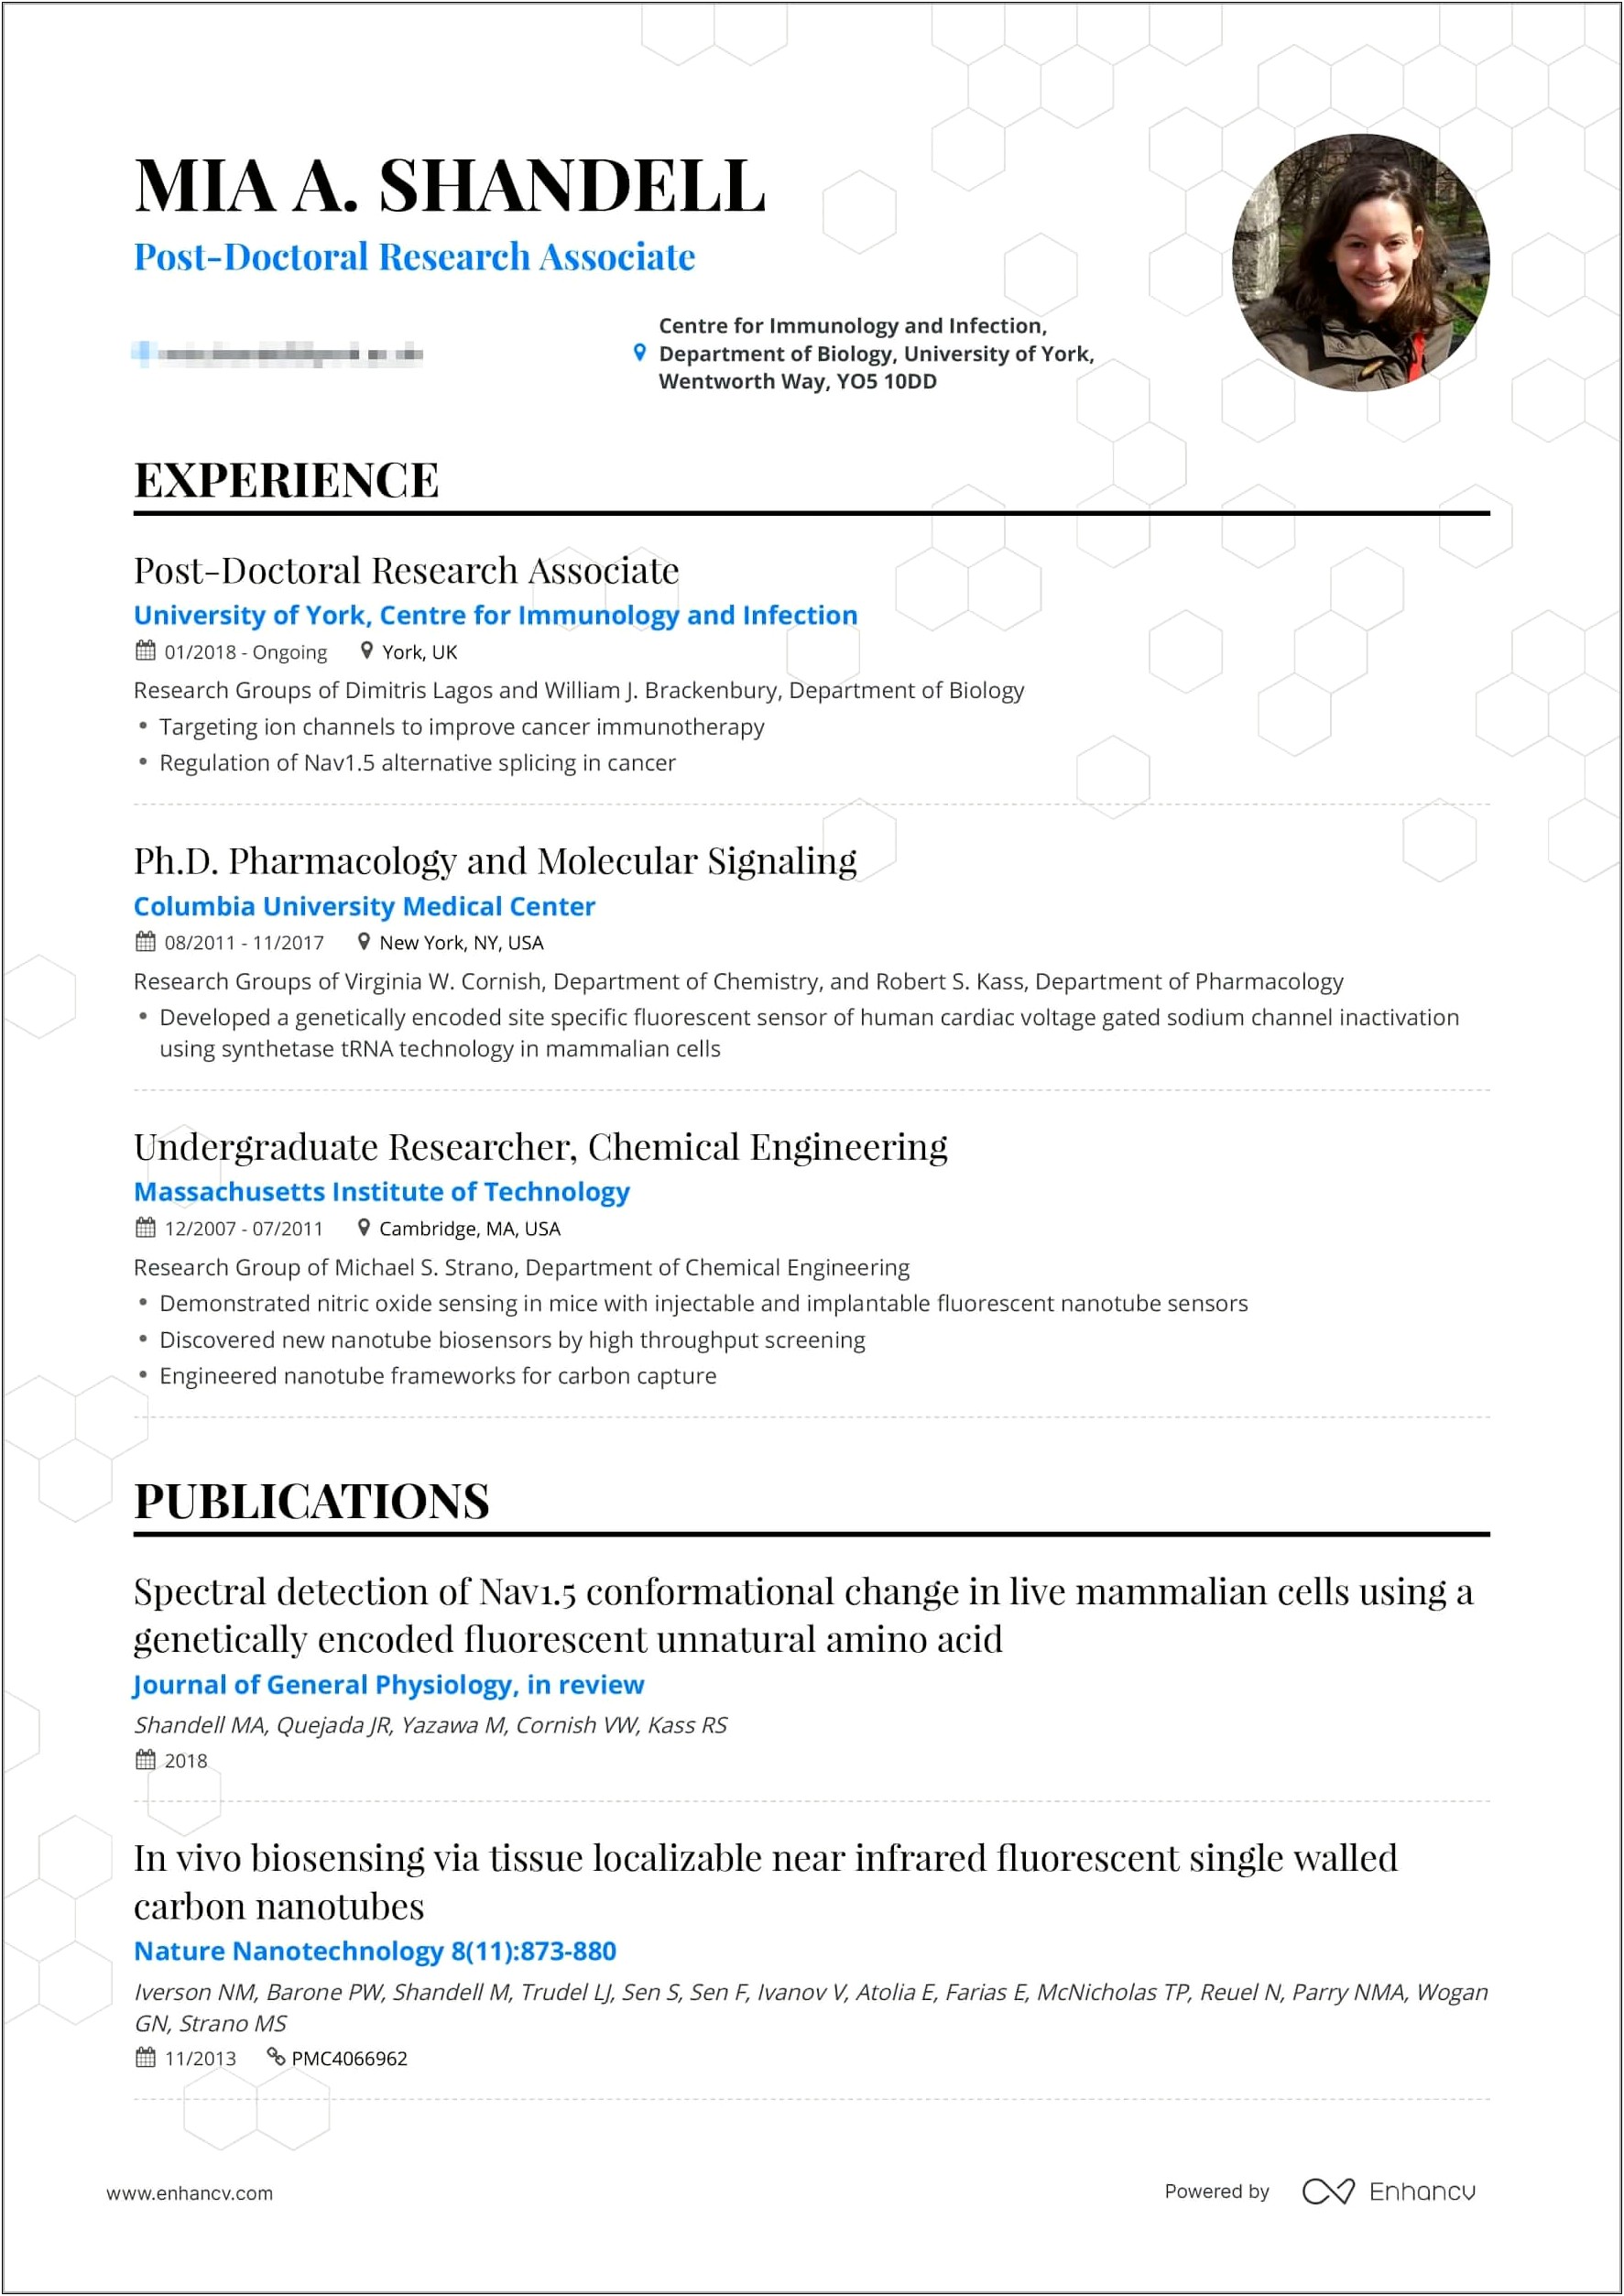 Resume 30 Years Experience In The Medical Field